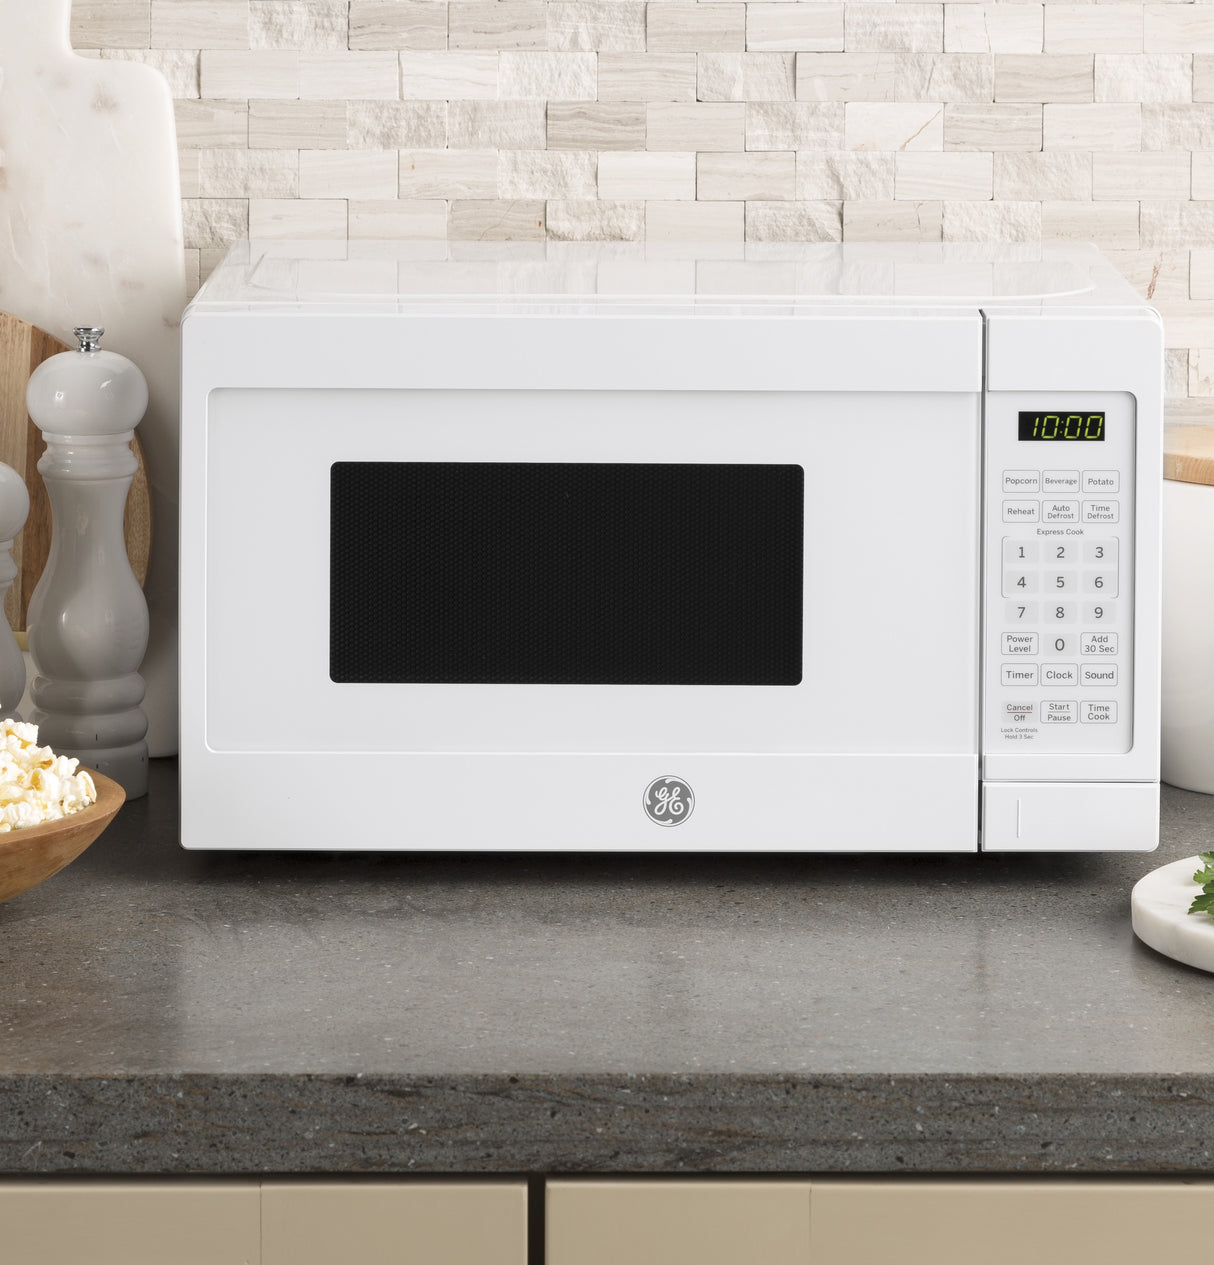 GE(R) 0.7 Cu. Ft. Capacity Countertop Microwave Oven - (JES1072DMWW)